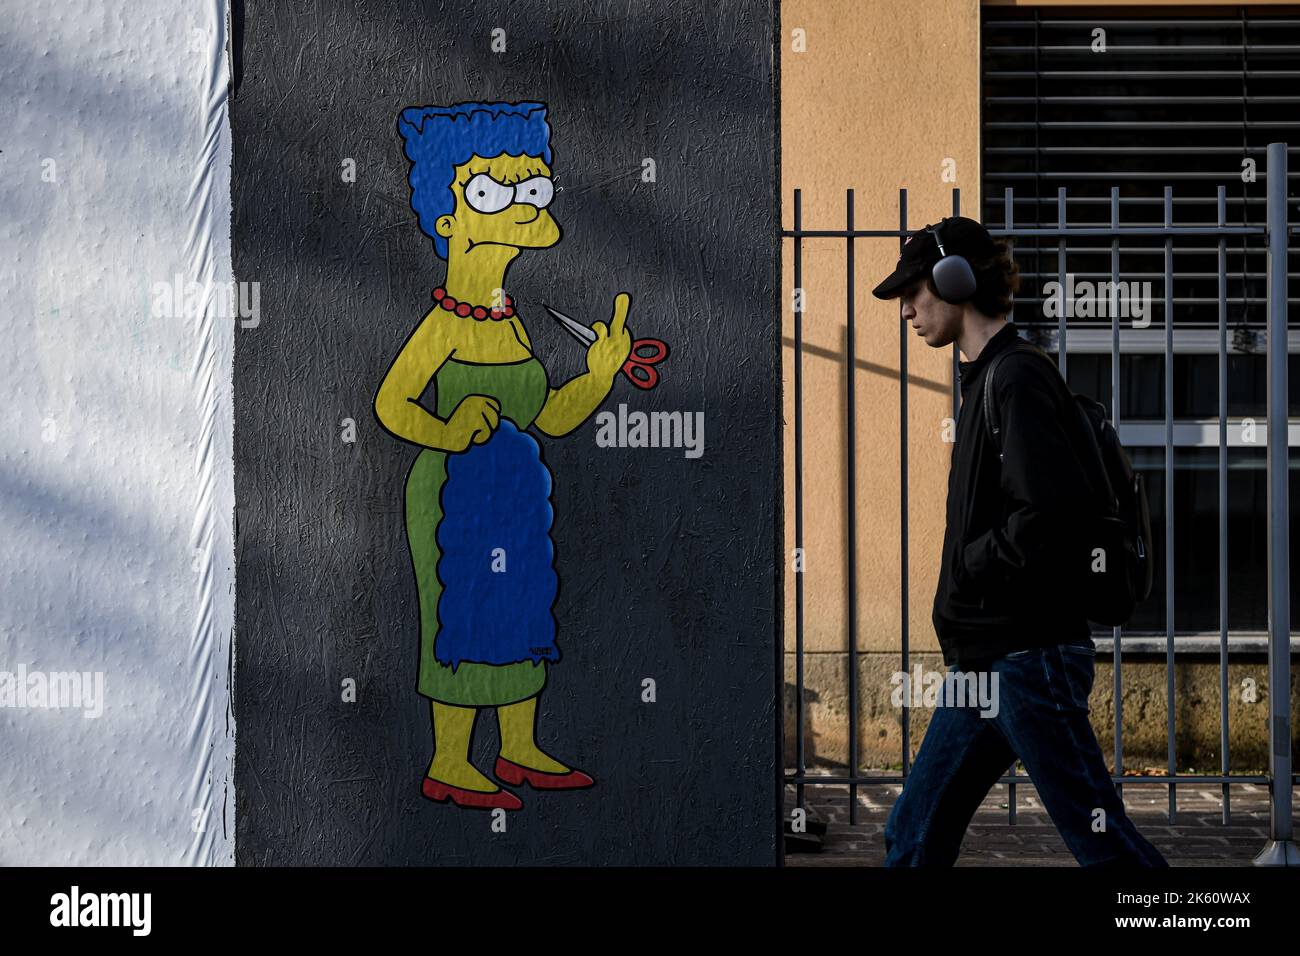 Milan, Italy on October 11, 2022, A man walks past a mural entitled ‘The Cut 2’ by street artist aleXsandro Palombo depicting The Simpsons' character Marge Simpson cutting her hair and giving the middle finger in solidarity with the women of Iran in front of the Iranian Consulate in Milan, Italy on October 11, 2022. A first version of a similar mural, entitled 'The Cut' appeared on October 5 at the same location and was later on removed. Credit: Piero Cruciatti/Alamy Live News Credit: Piero Cruciatti/Alamy Live News Stock Photo